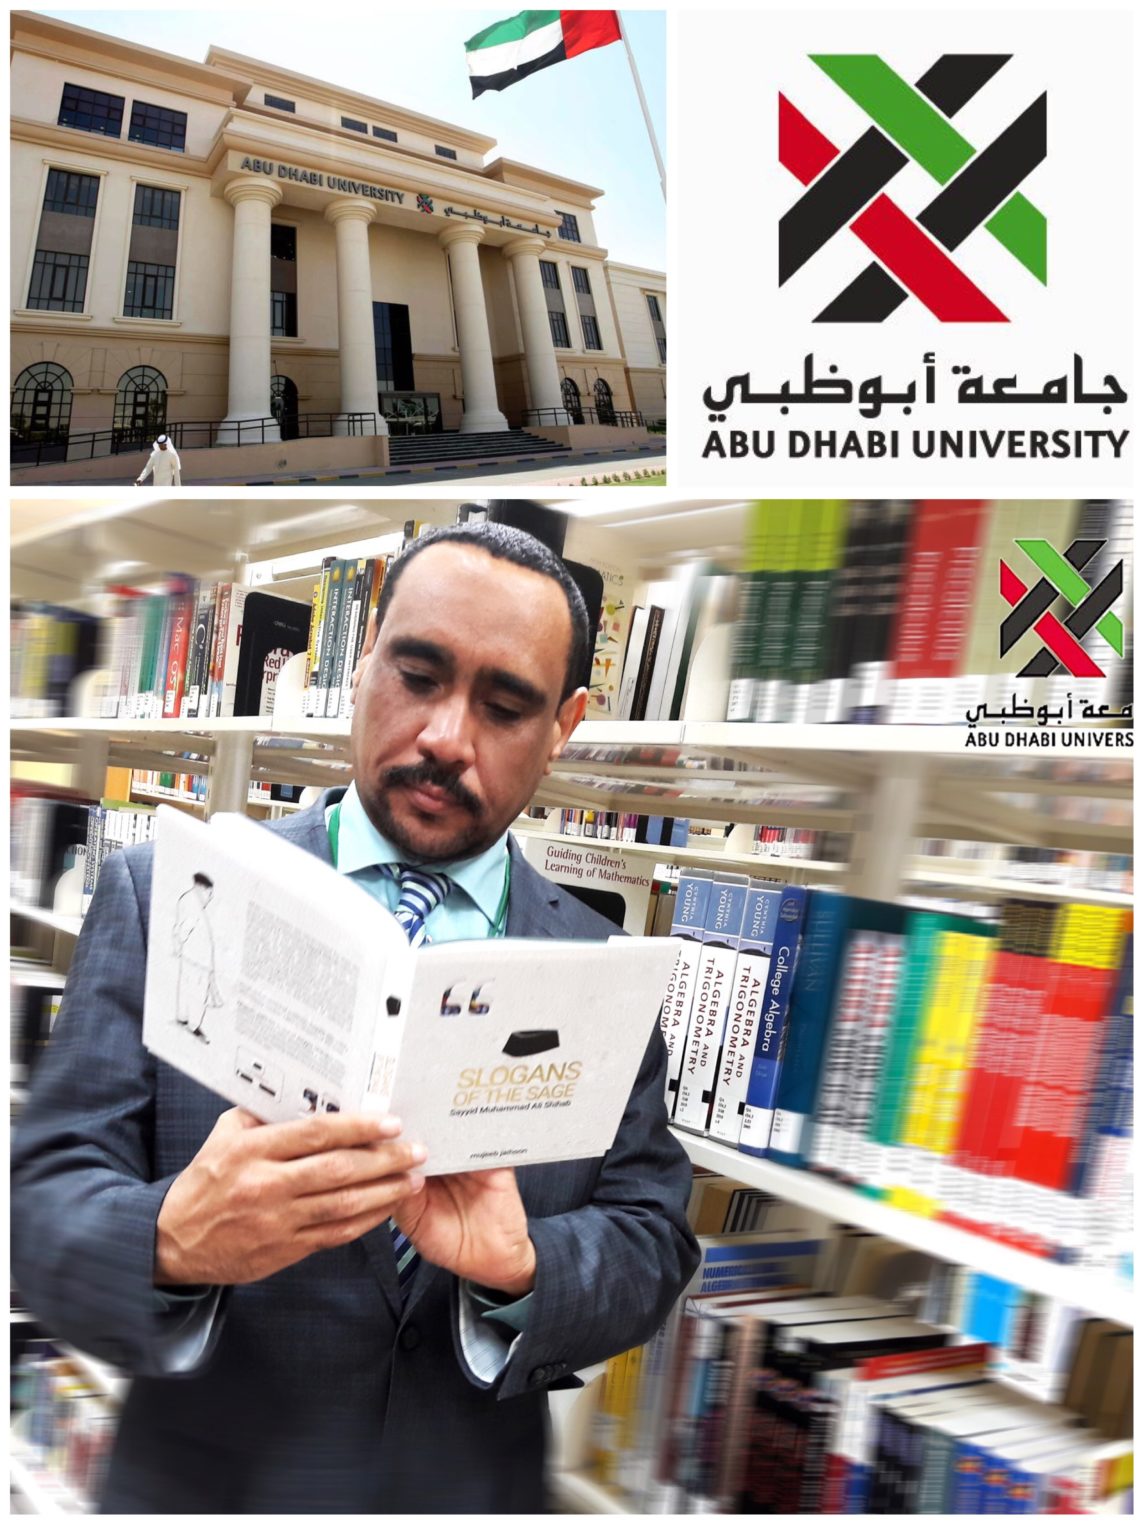 Omar Abbas, Library Manager, Abu Dhabi University reading Slogans of the Sage